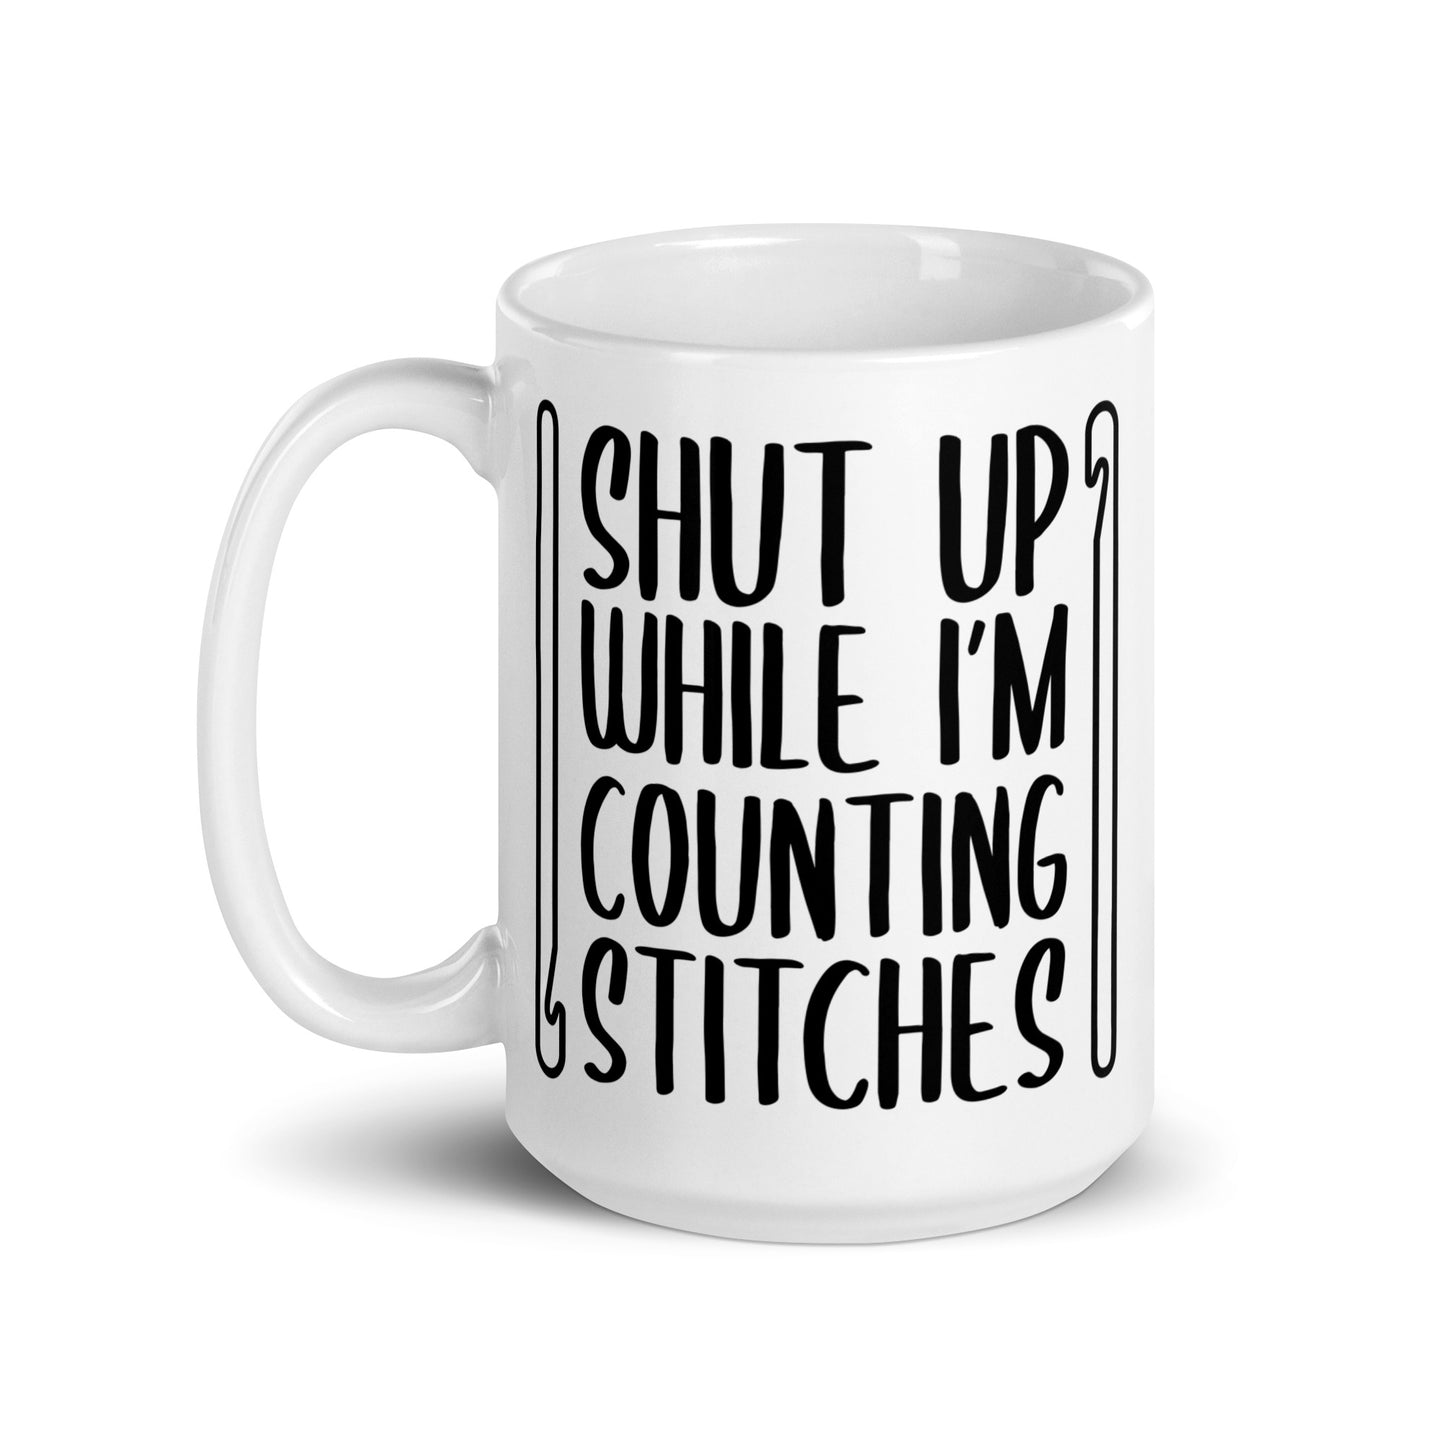 A white 15 ounce ceramic mug featuring black text that reads "Shut up while I'm counting stitches." The text is framed by a crochet hook to the left and right.